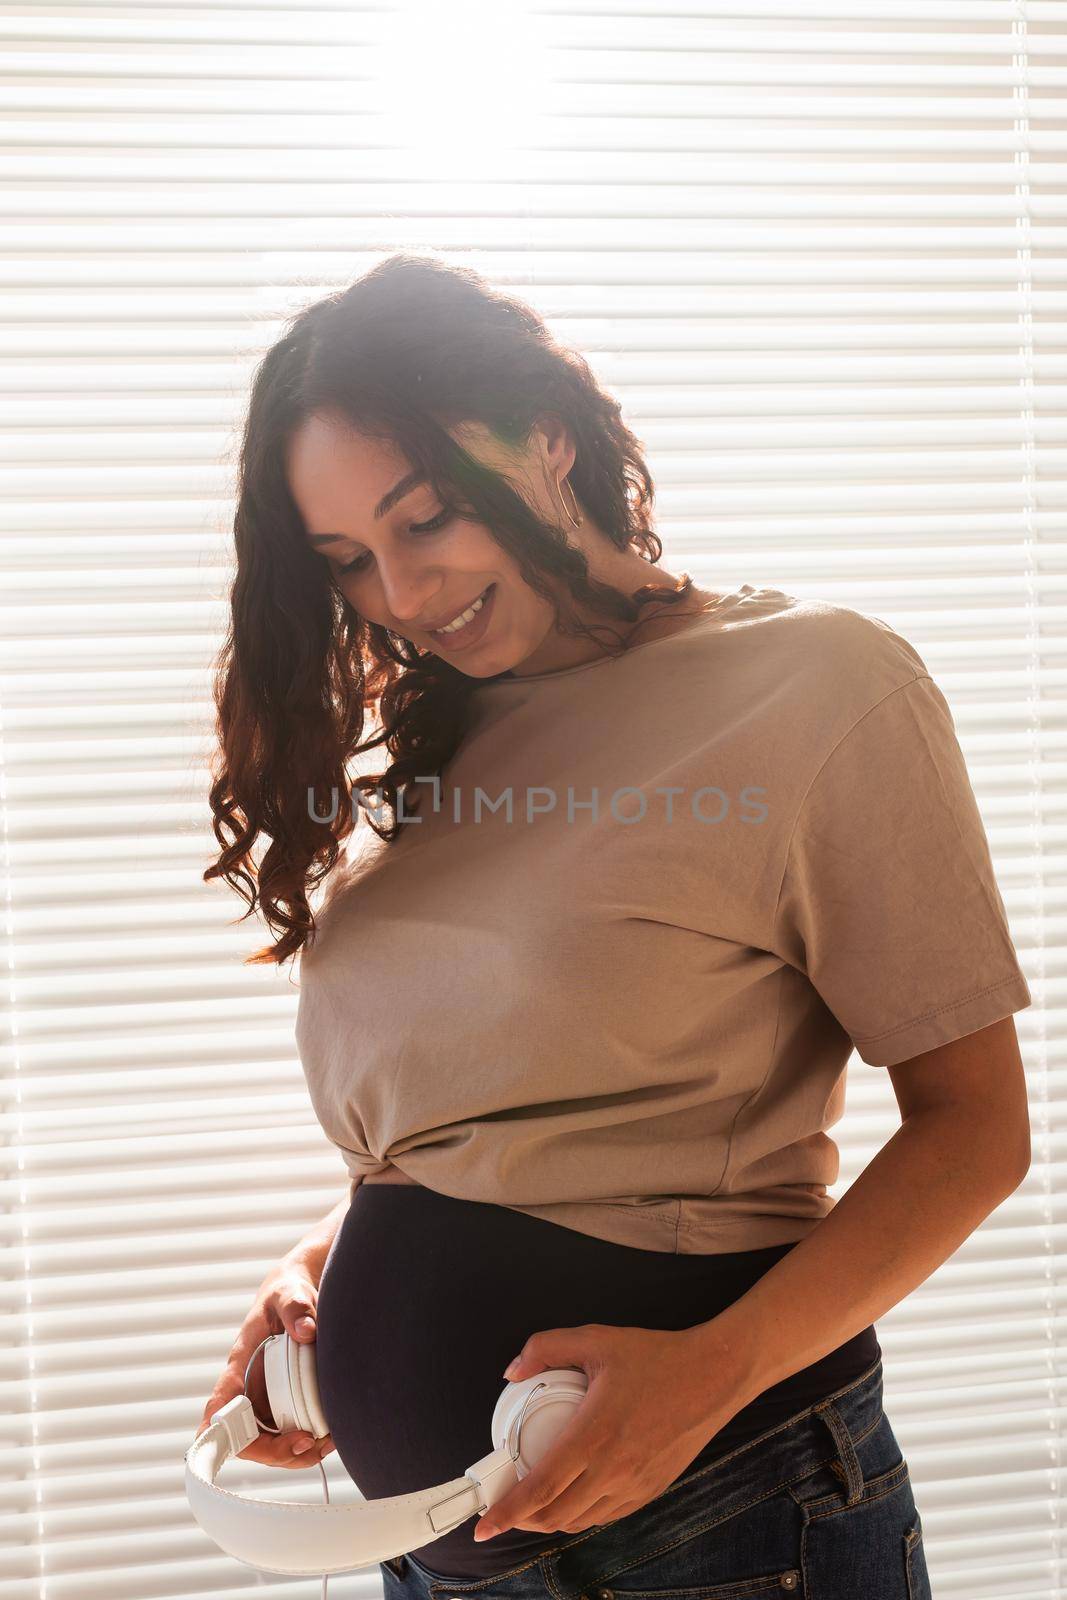 Smiling brunette pacified pregnant woman listening to pleasant music using a smartphone and headphones. Sedation therapy before meeting with baby